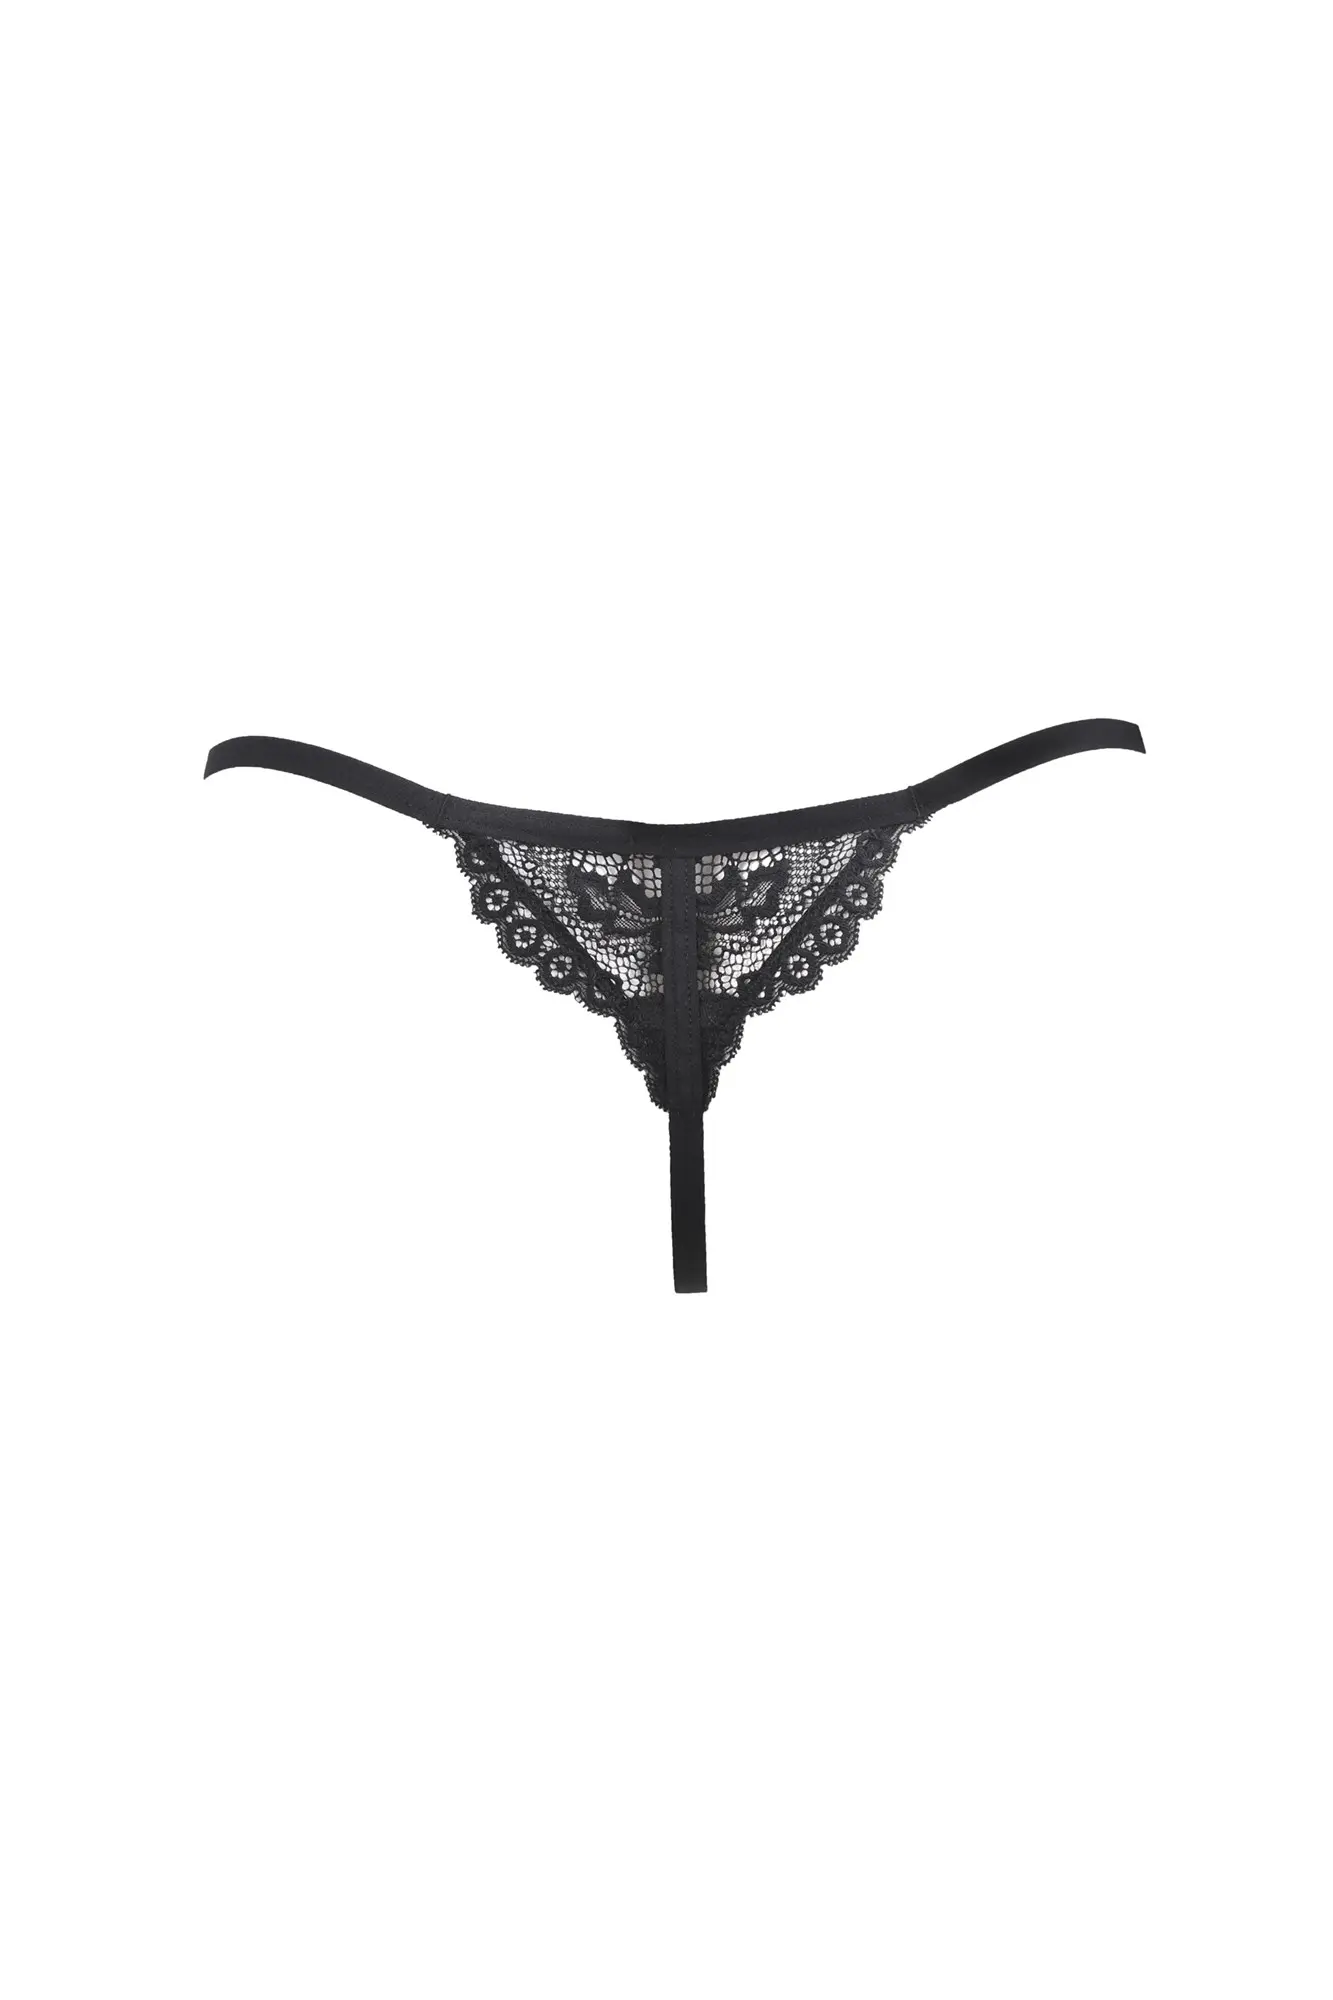 Contradiction Statement Thong, Pour Moi, Statement Thong, Black